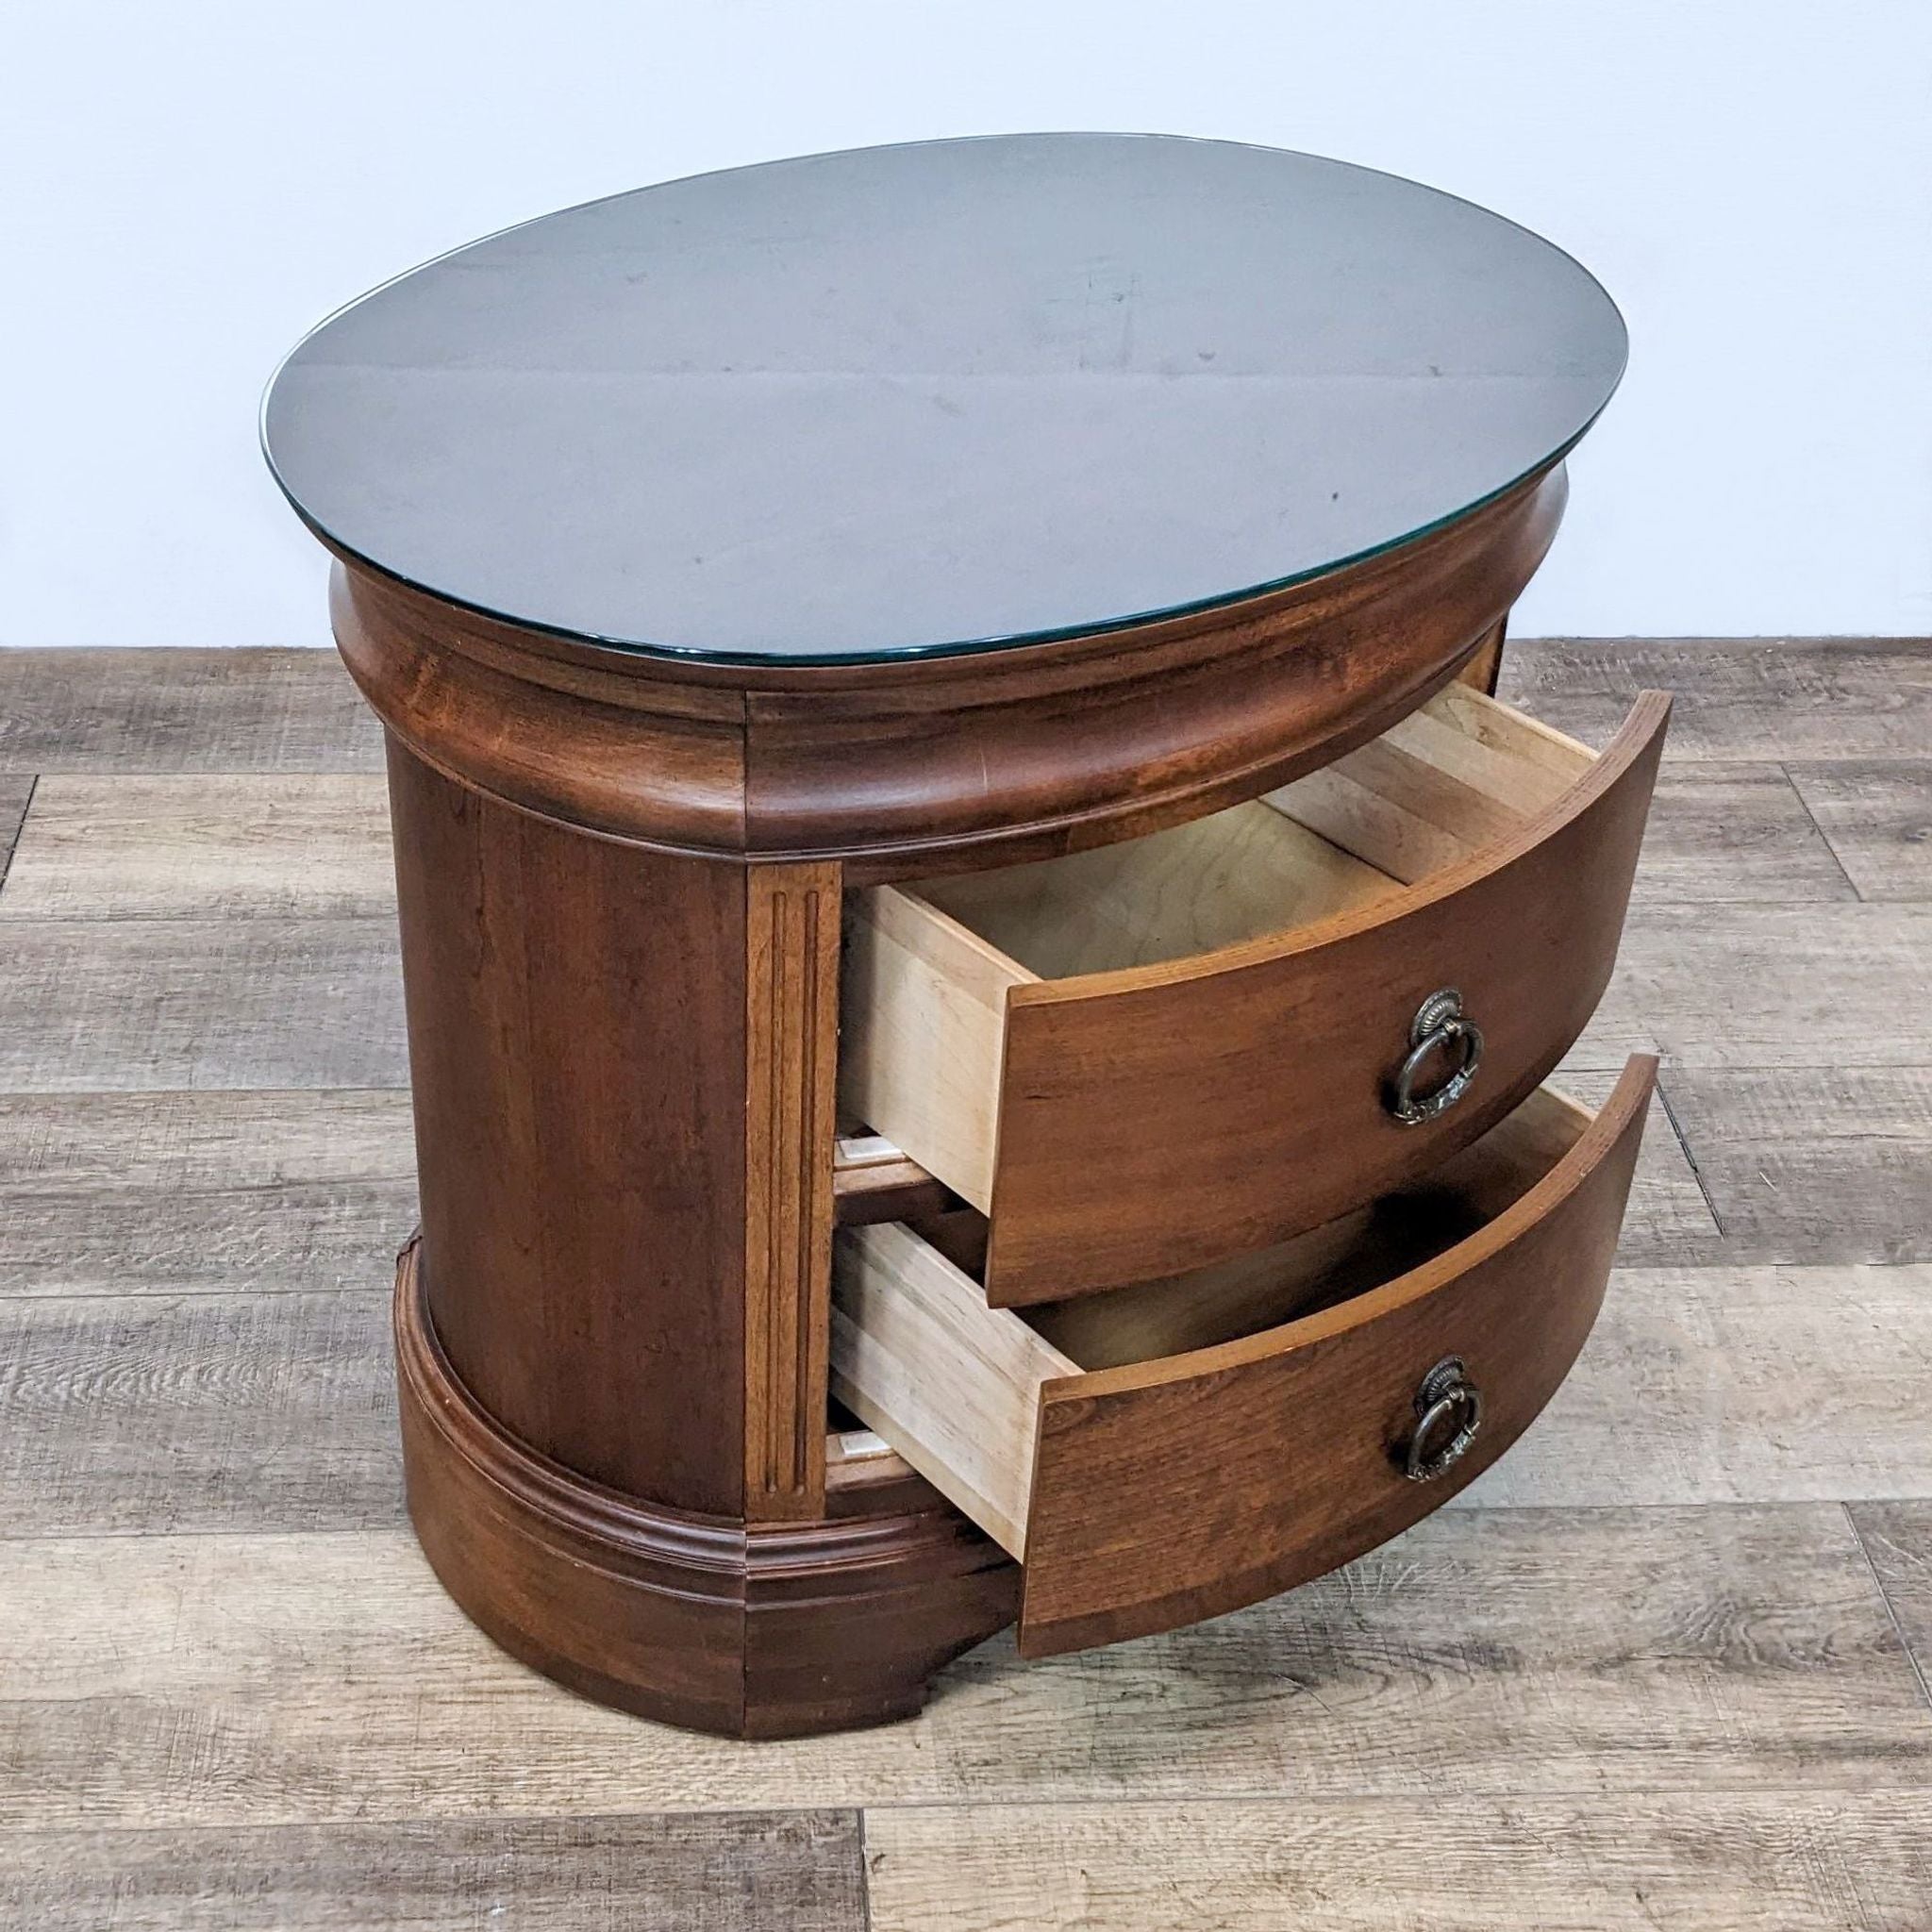 Open drawers of a Reperch end table showcasing storage, with glass top and a wooden base.